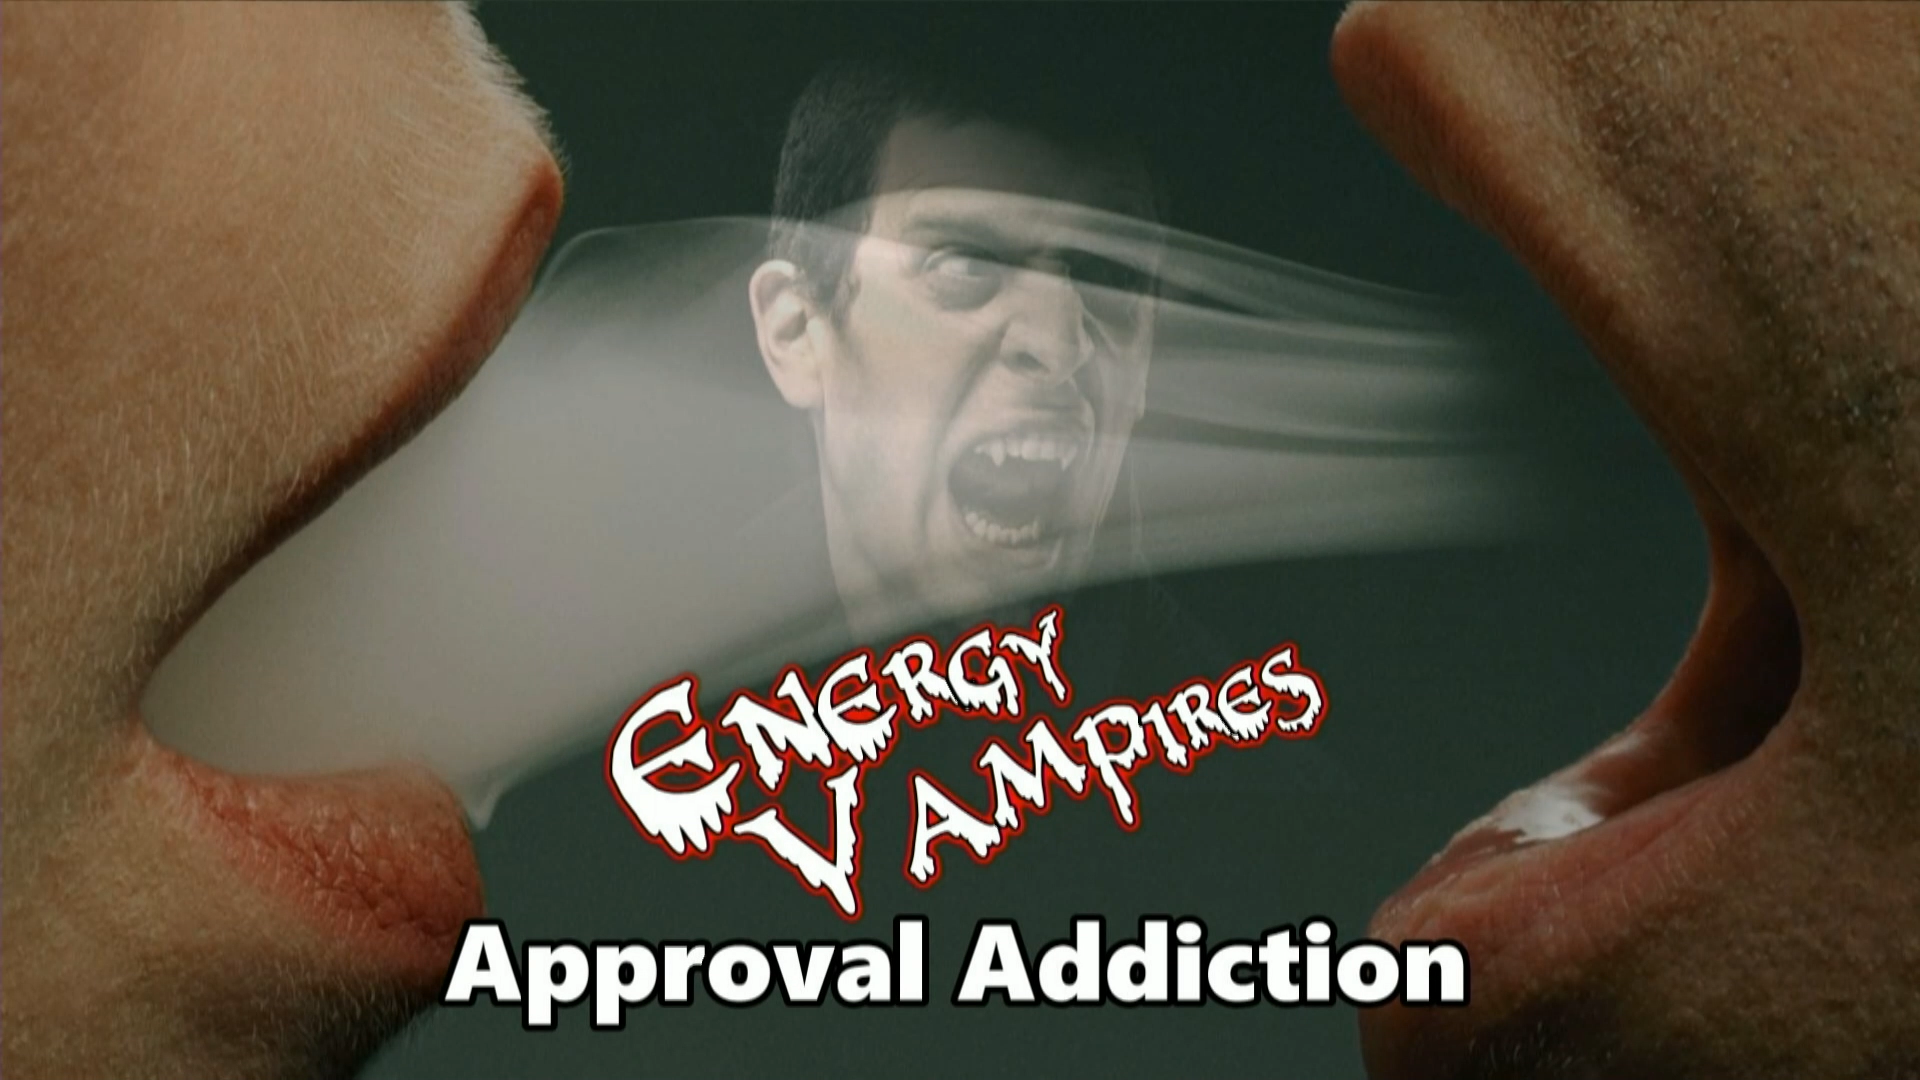 “Approval Addiction”